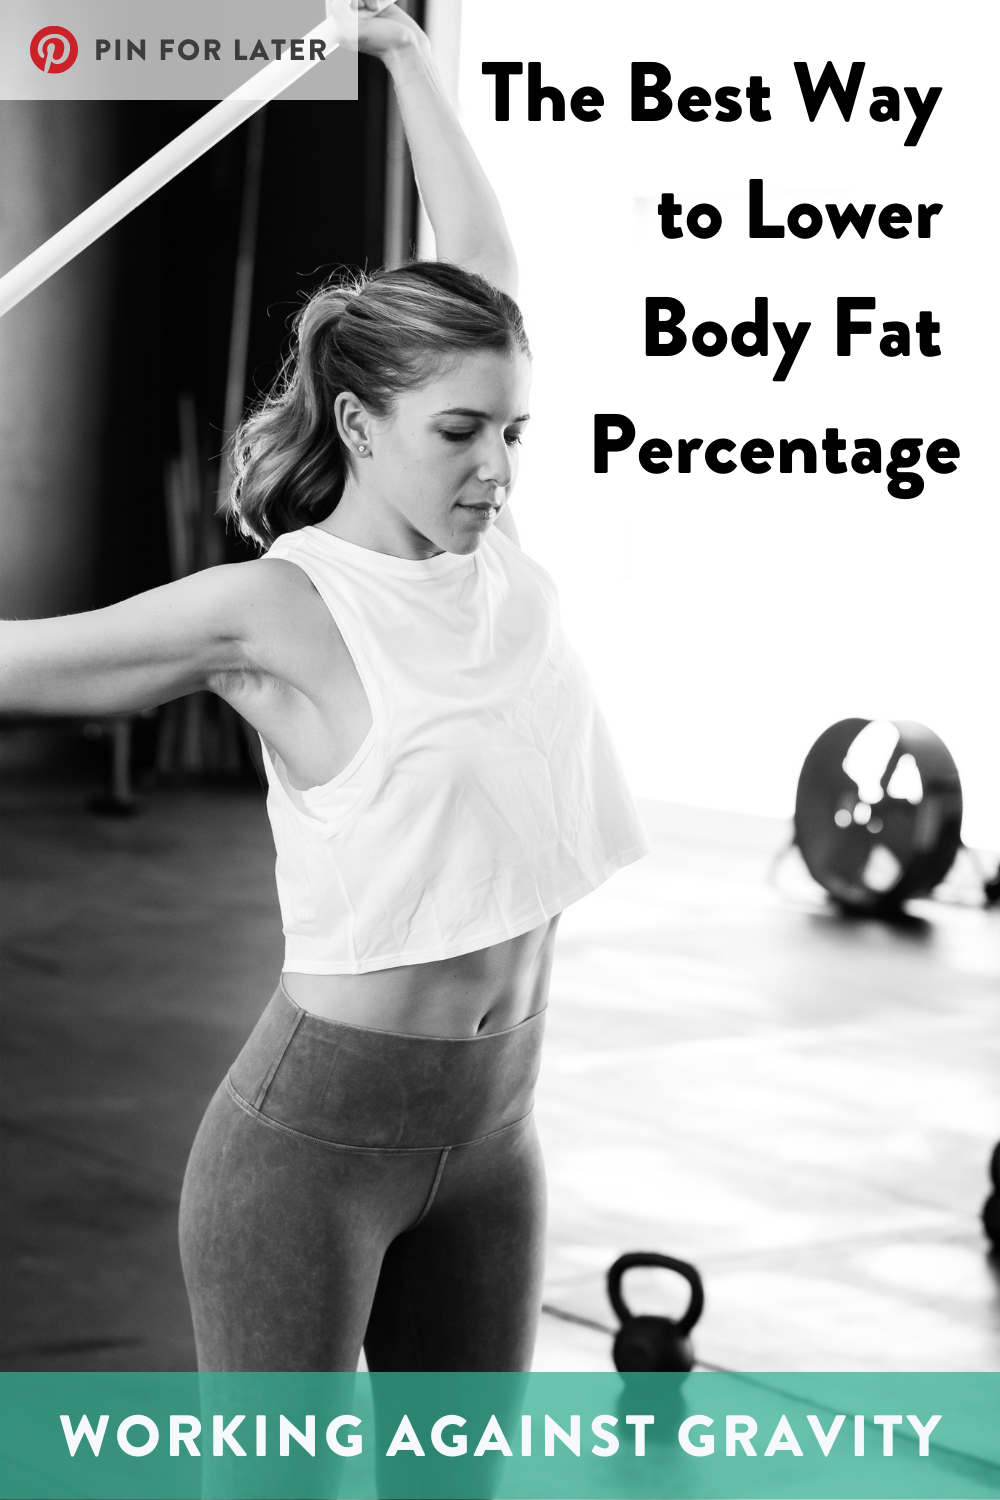 Percentage Body Fat & Weight - What's Normal? / Fitness / Weight Loss